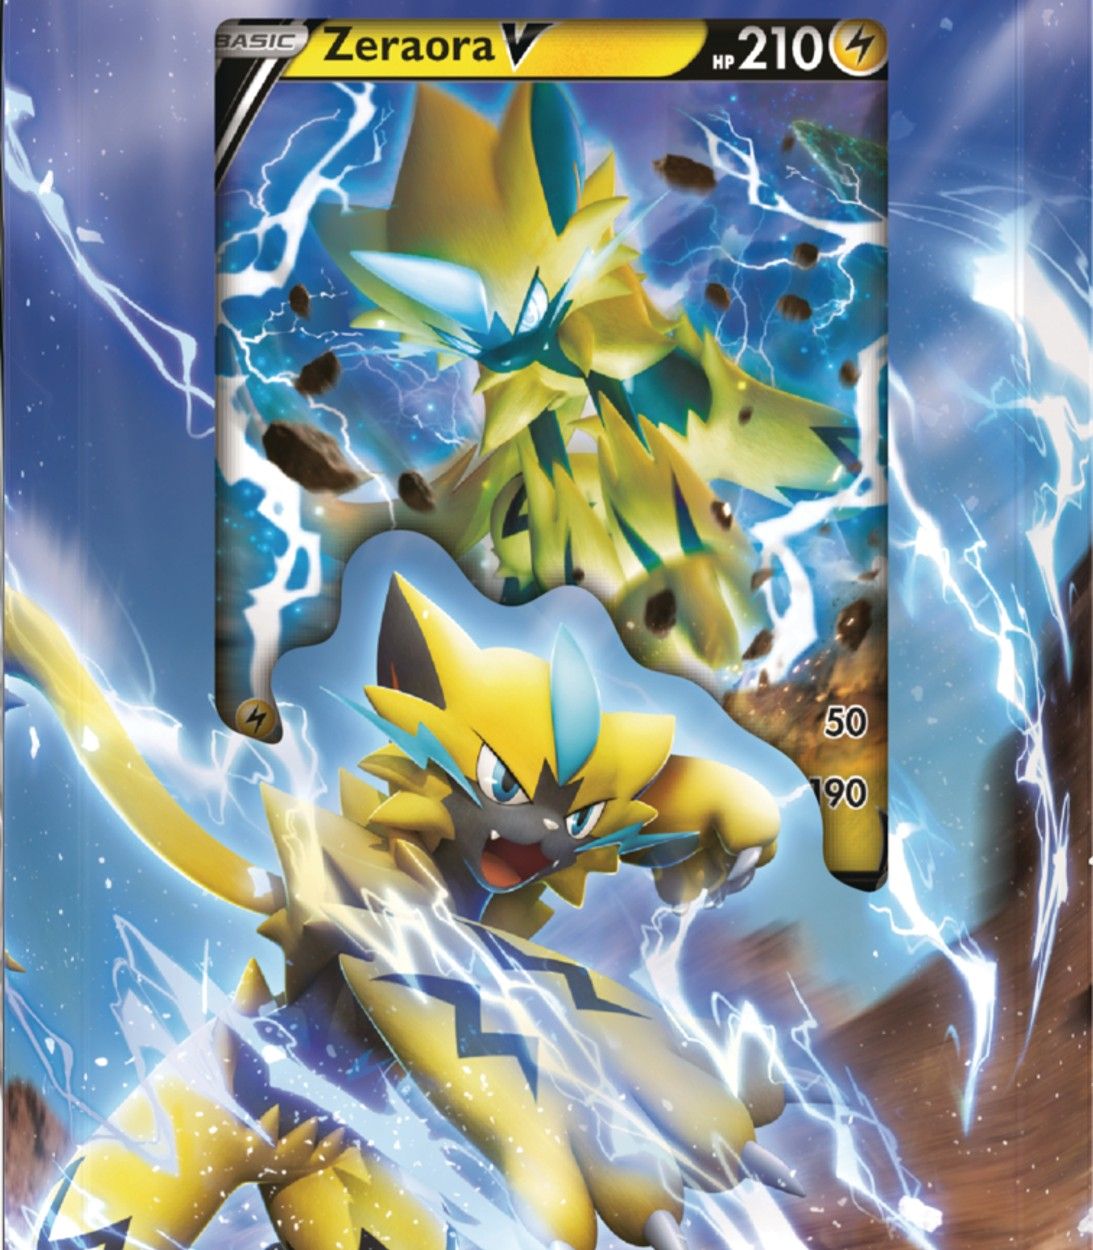 Close up image of the box art for the Zeraora V Battle Deck, featuring the Zeraora V card